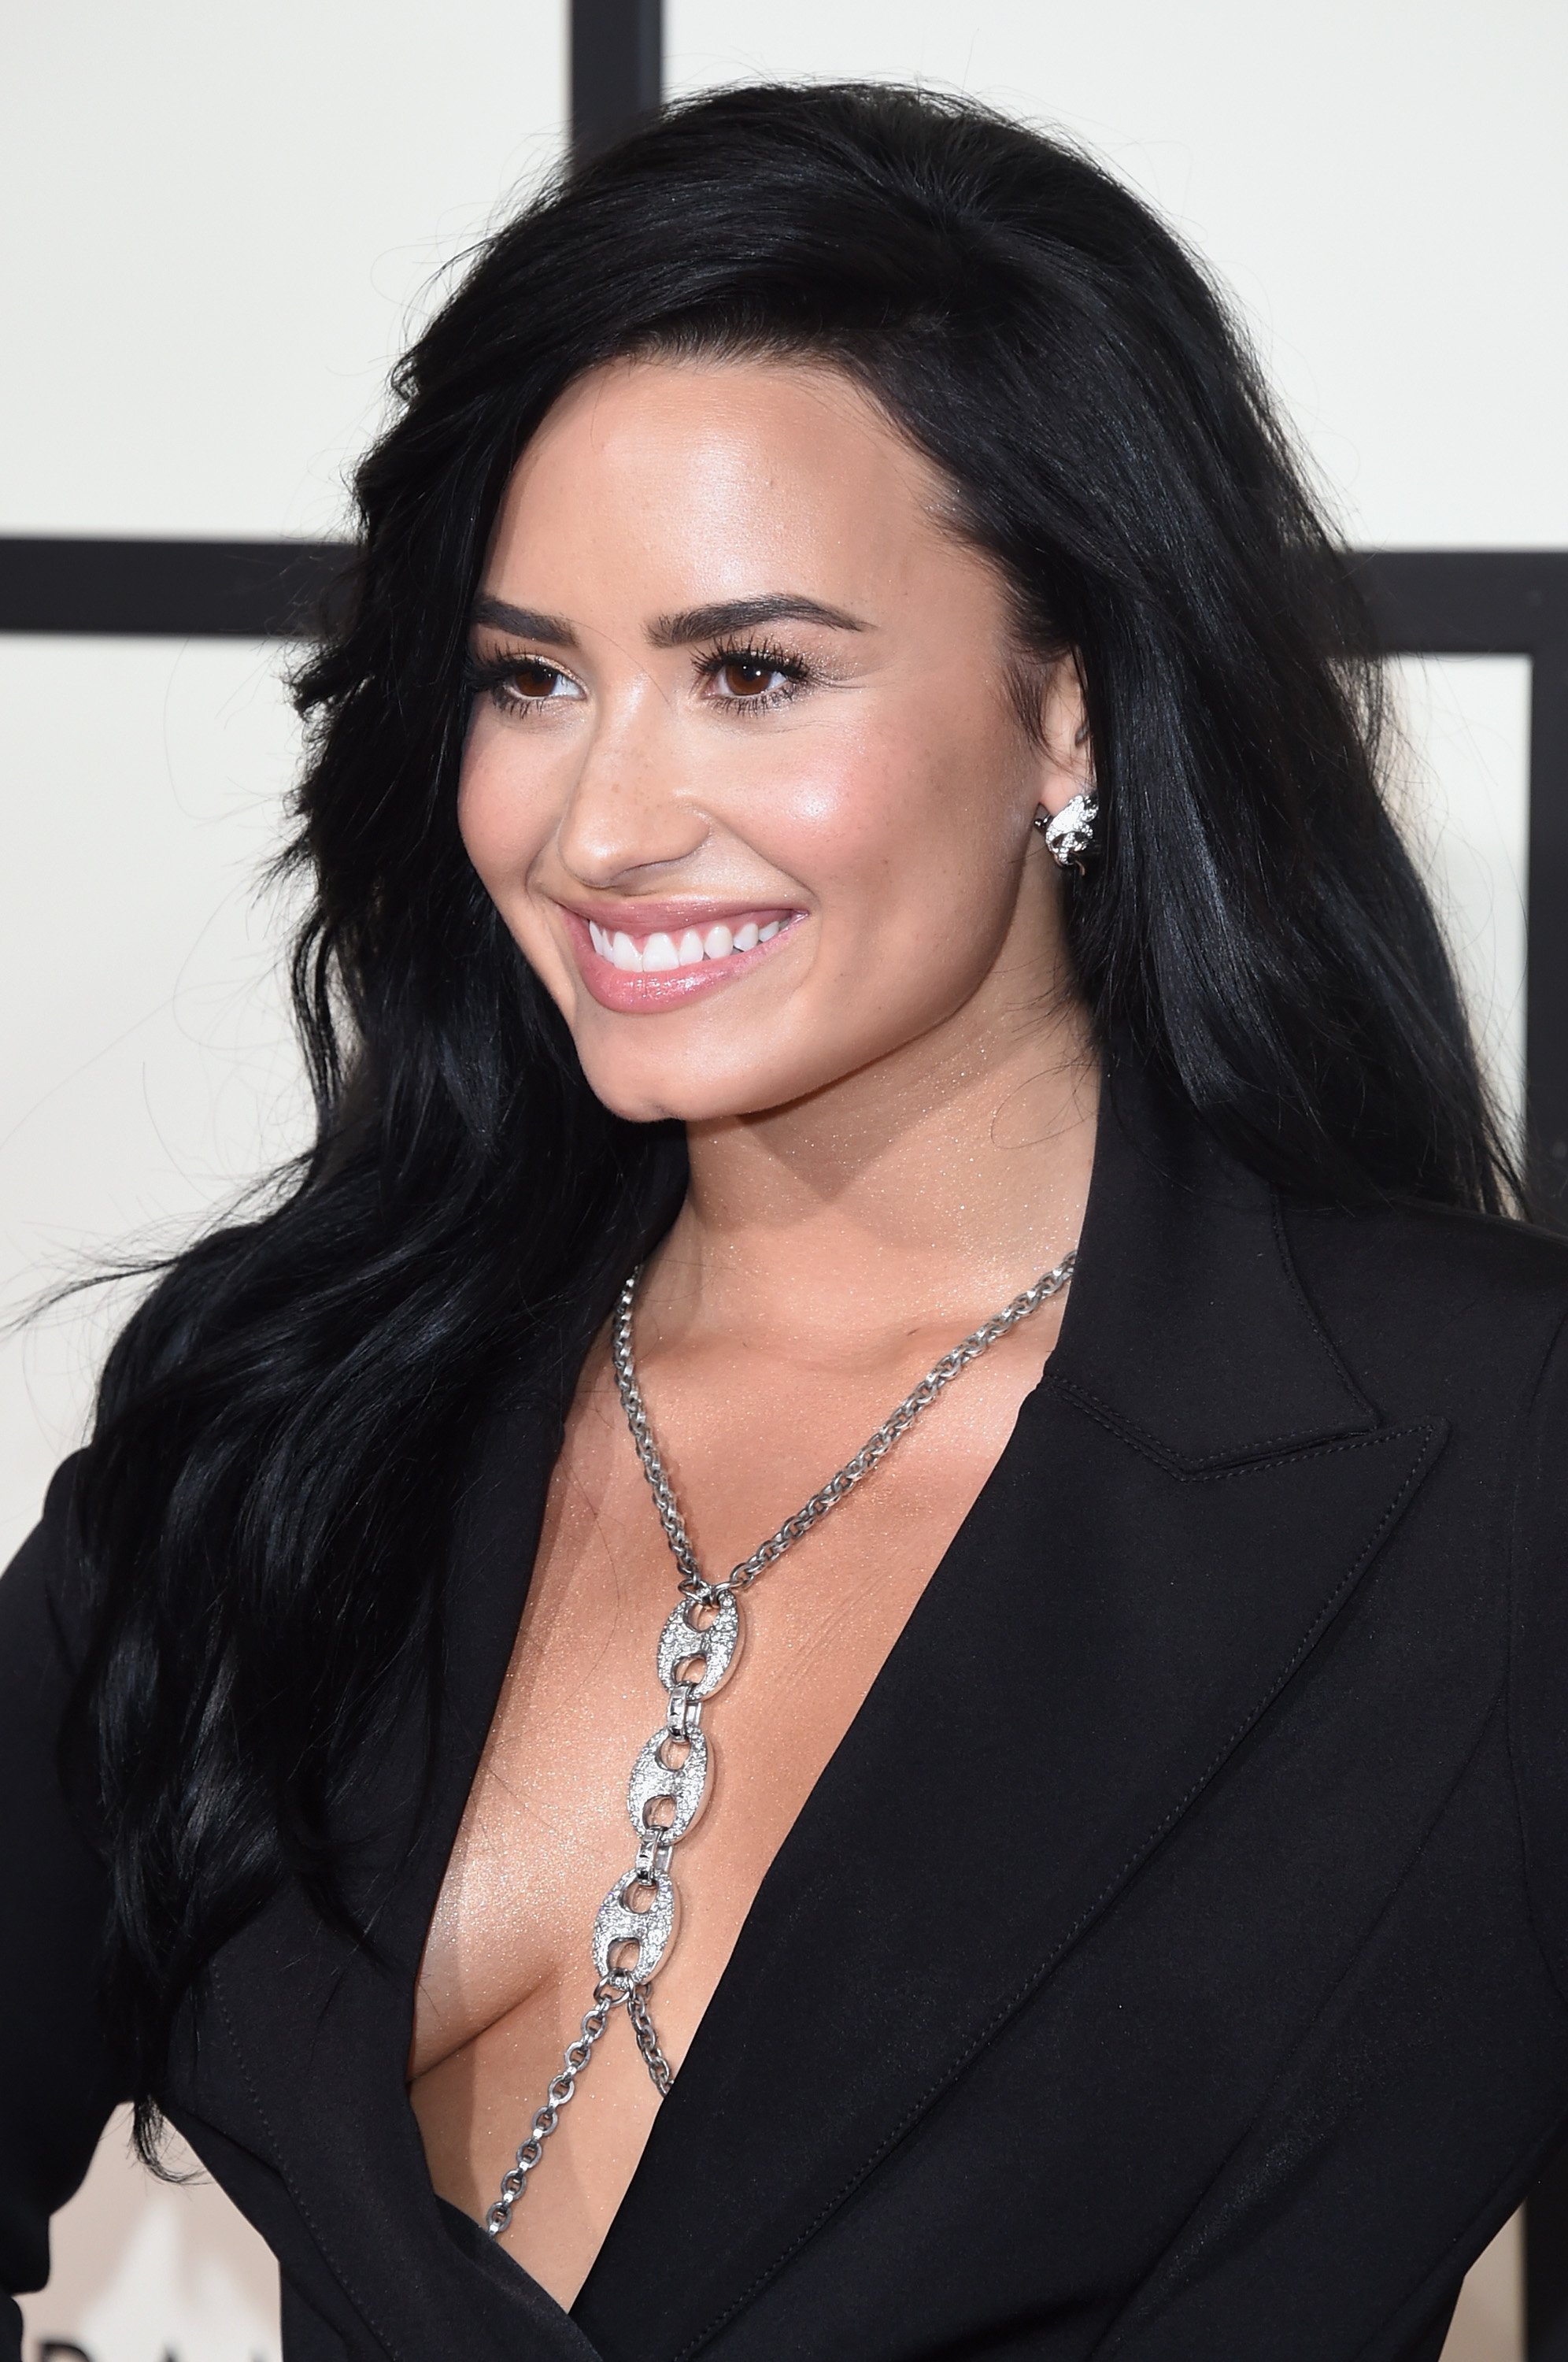 Singer Demi Lovato during the 2016 Grammy Awards in Staples Center. | Photo: Getty Images